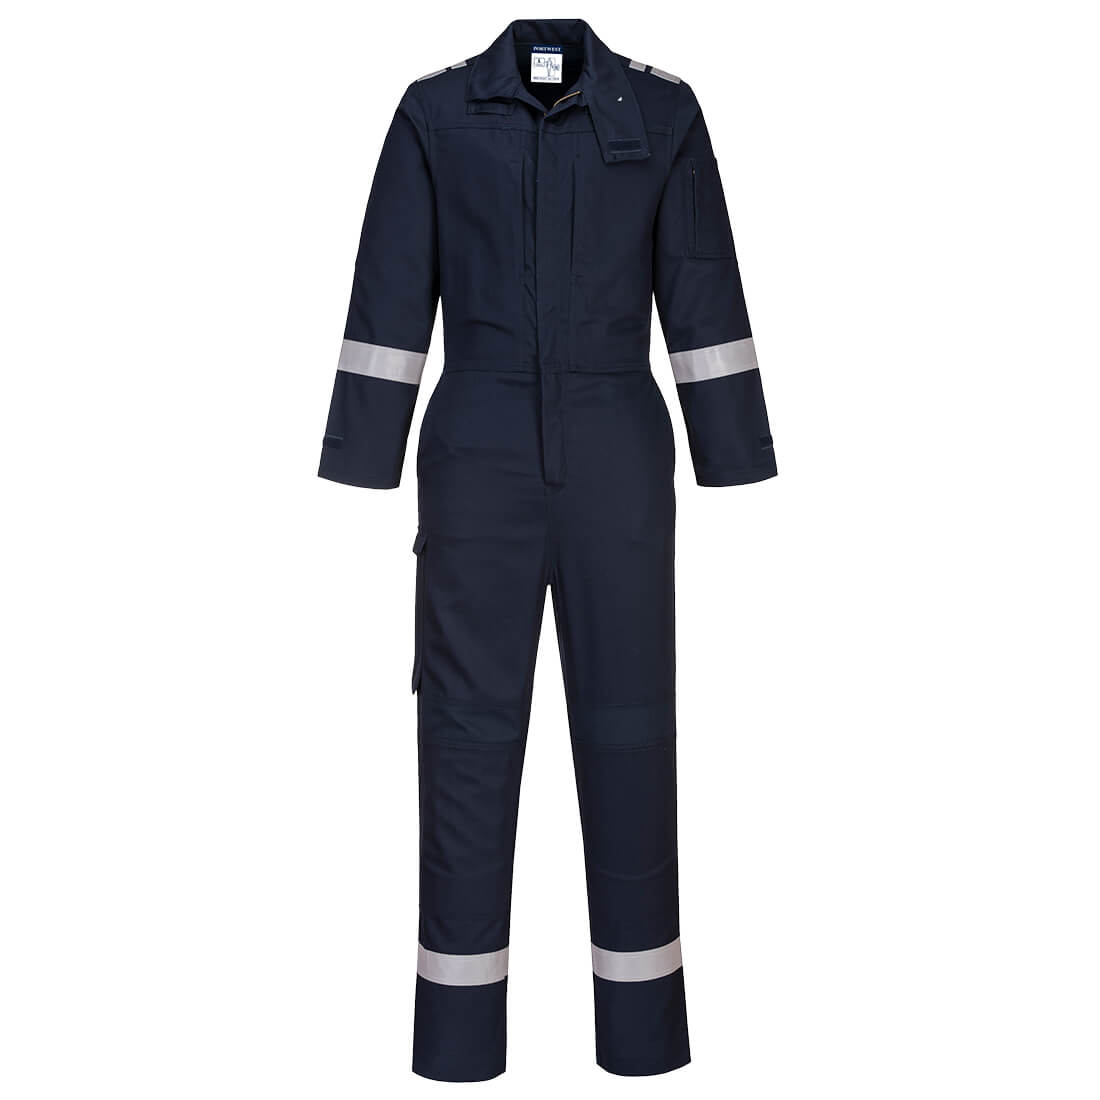 Bizflame Plus Stretch Panelled Coverall 